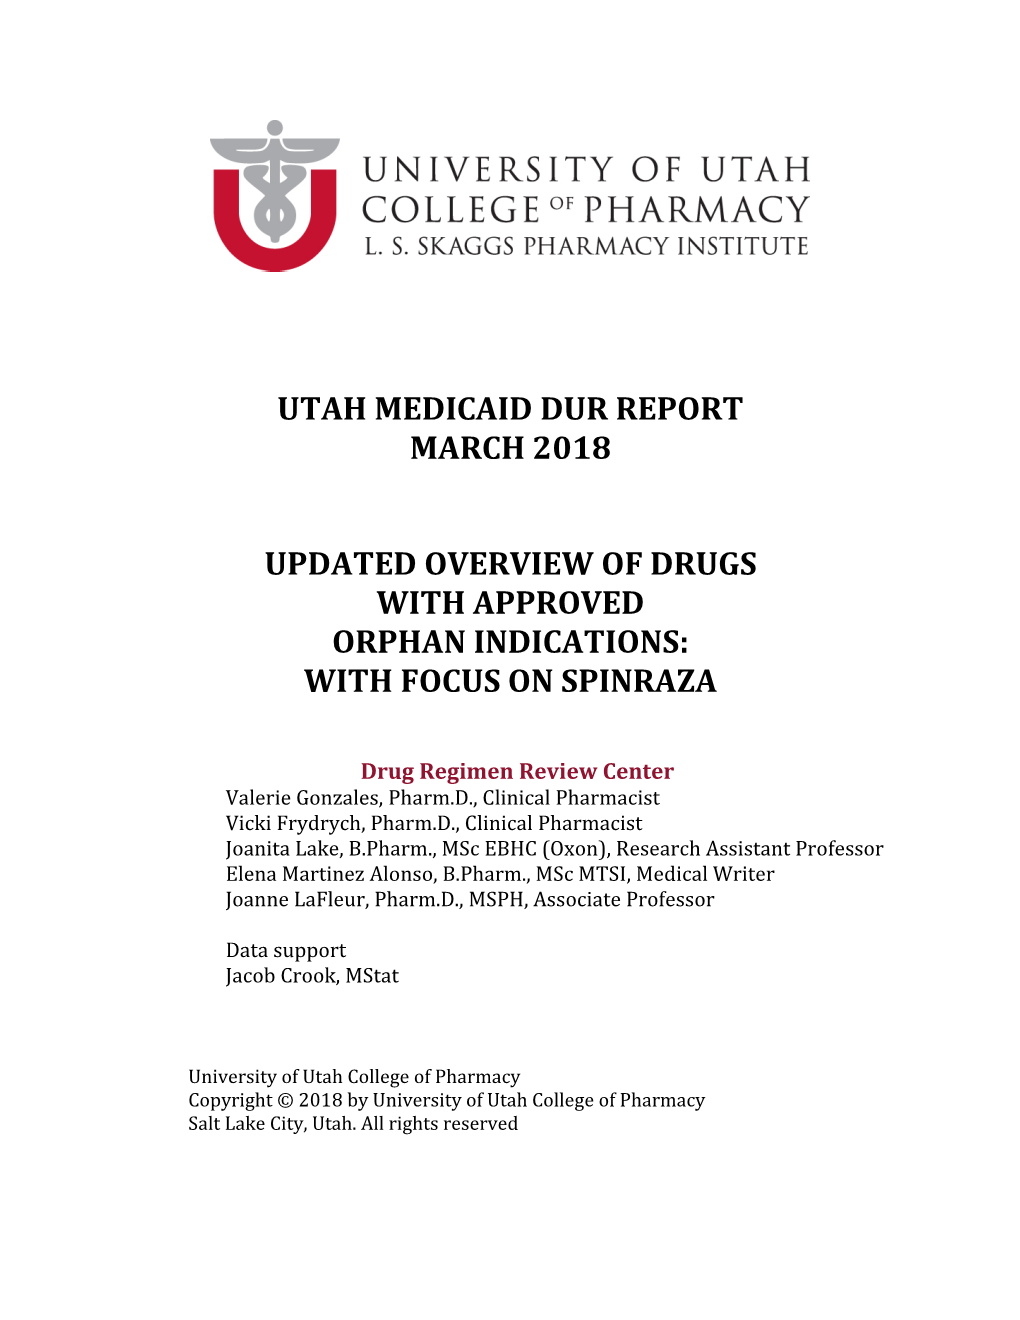 Utah Medicaid Dur Report March 2018 Updated Overview of Drugs with Approved Orphan Indications: with Focus on Spinraza